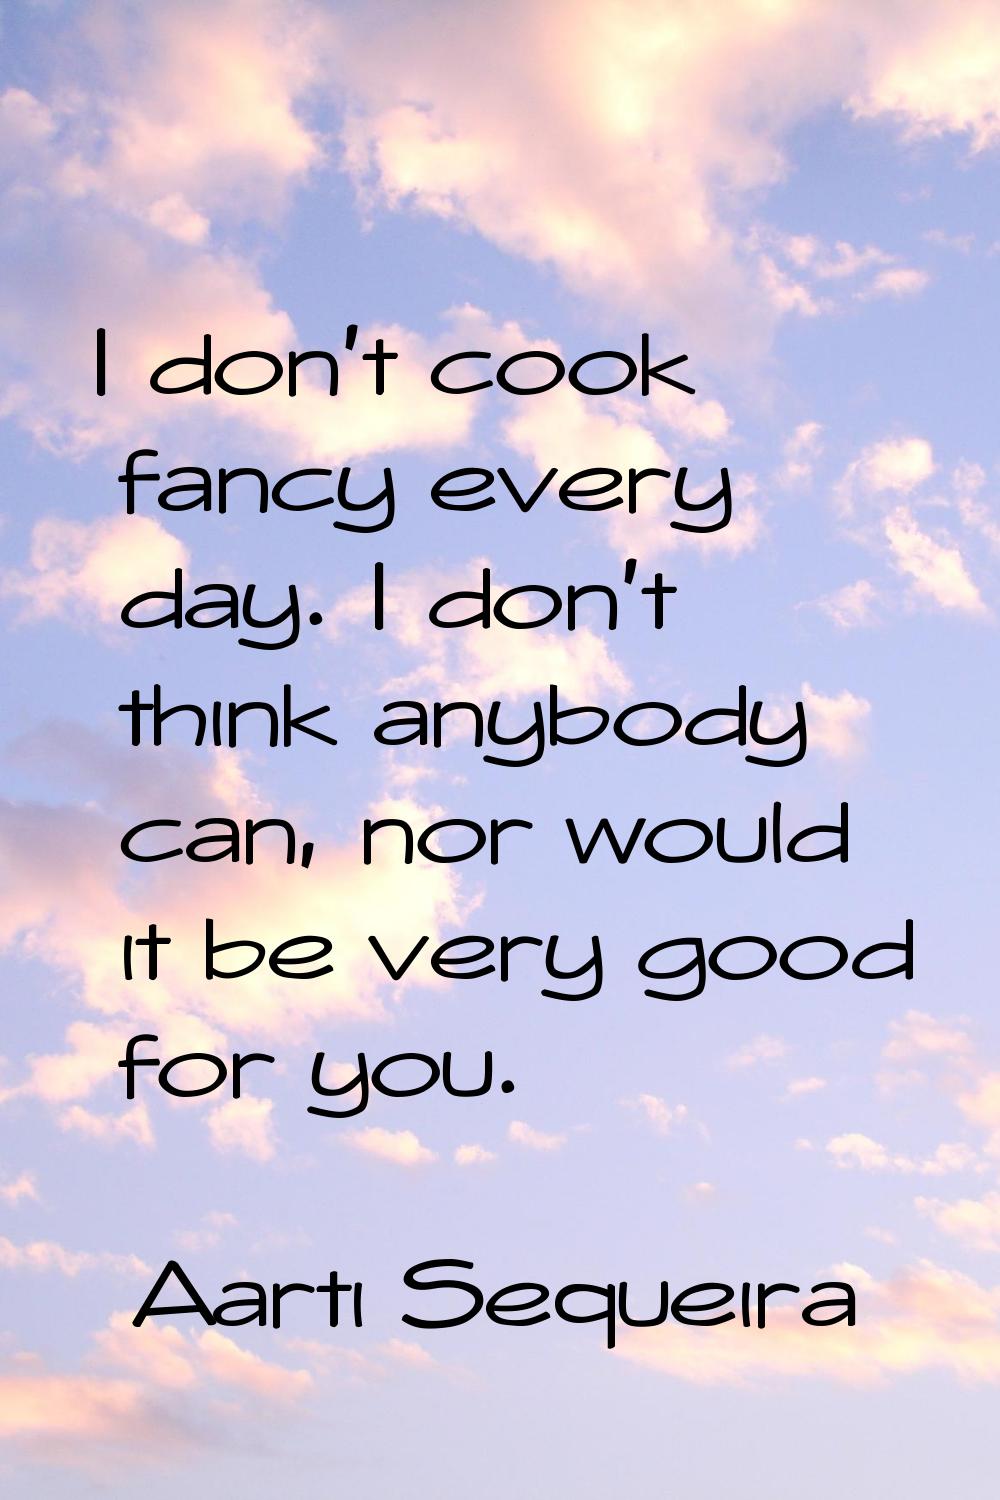 I don't cook fancy every day. I don't think anybody can, nor would it be very good for you.